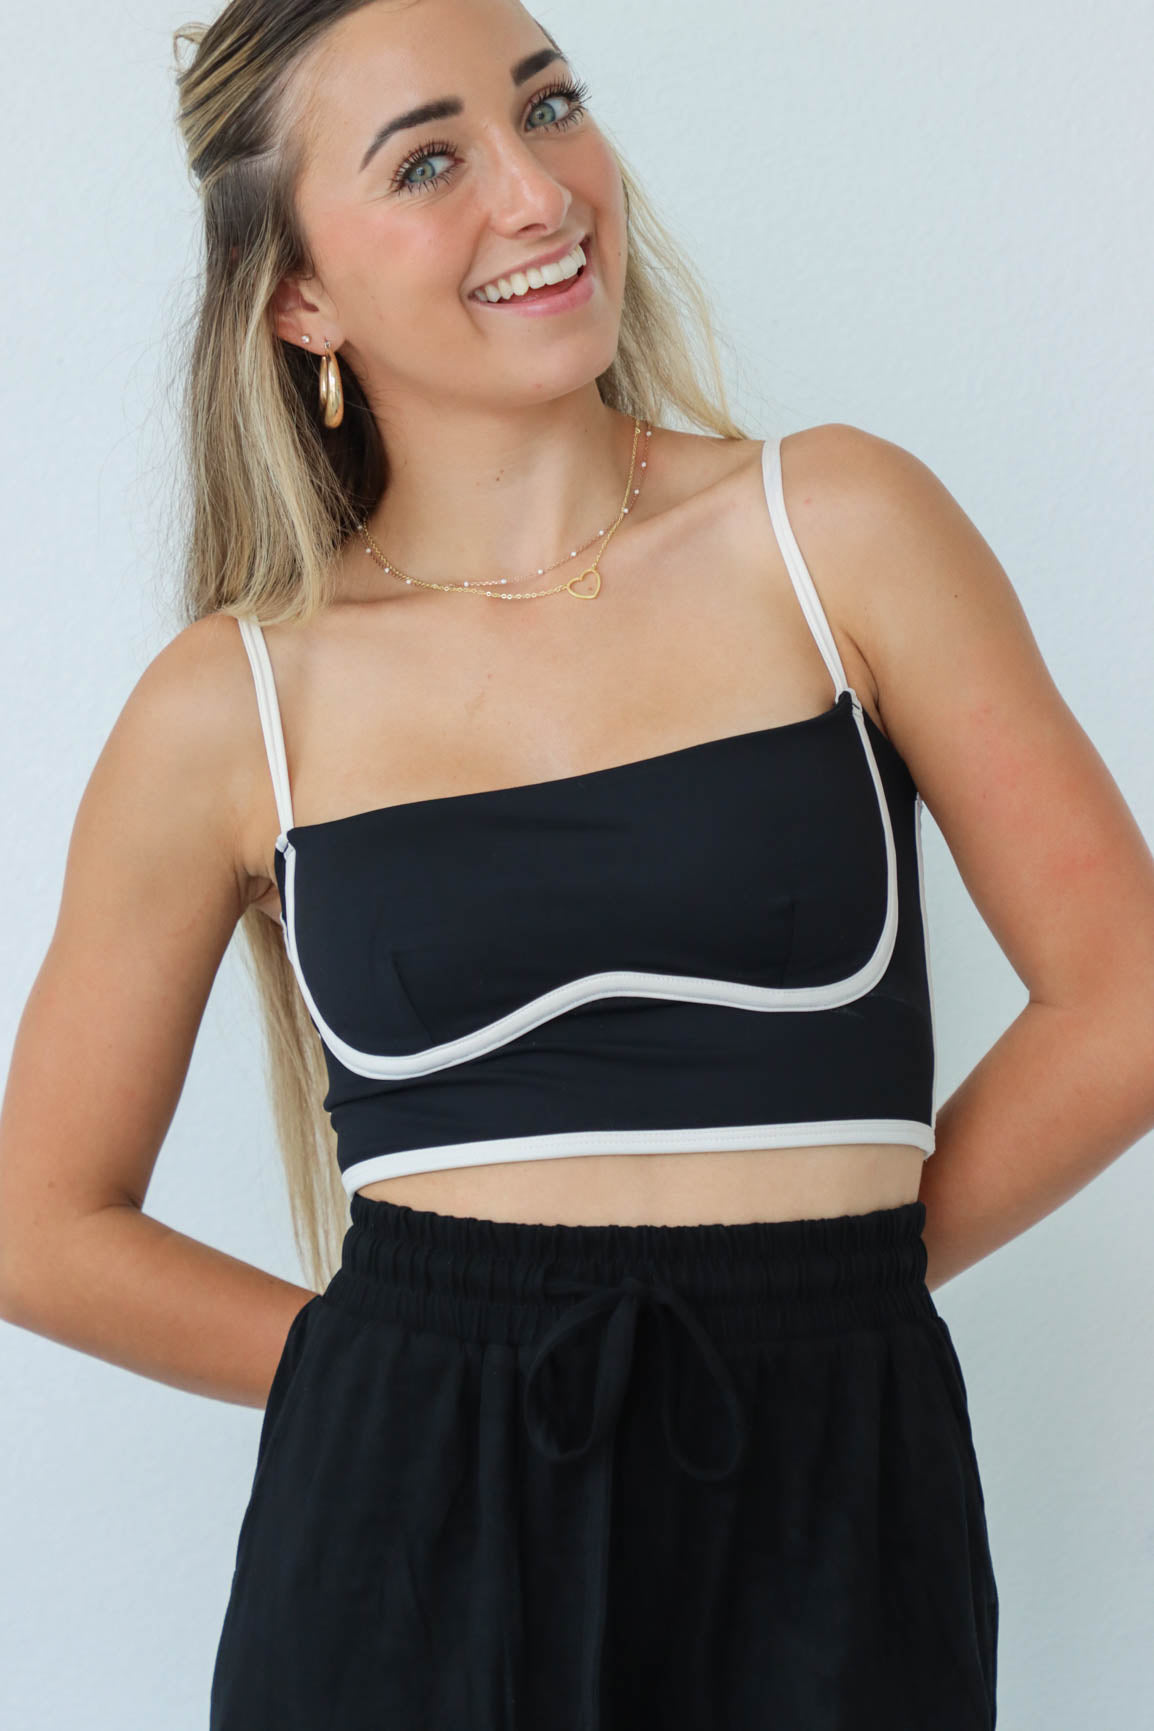 girl wearing black and white cropped athletic tank top